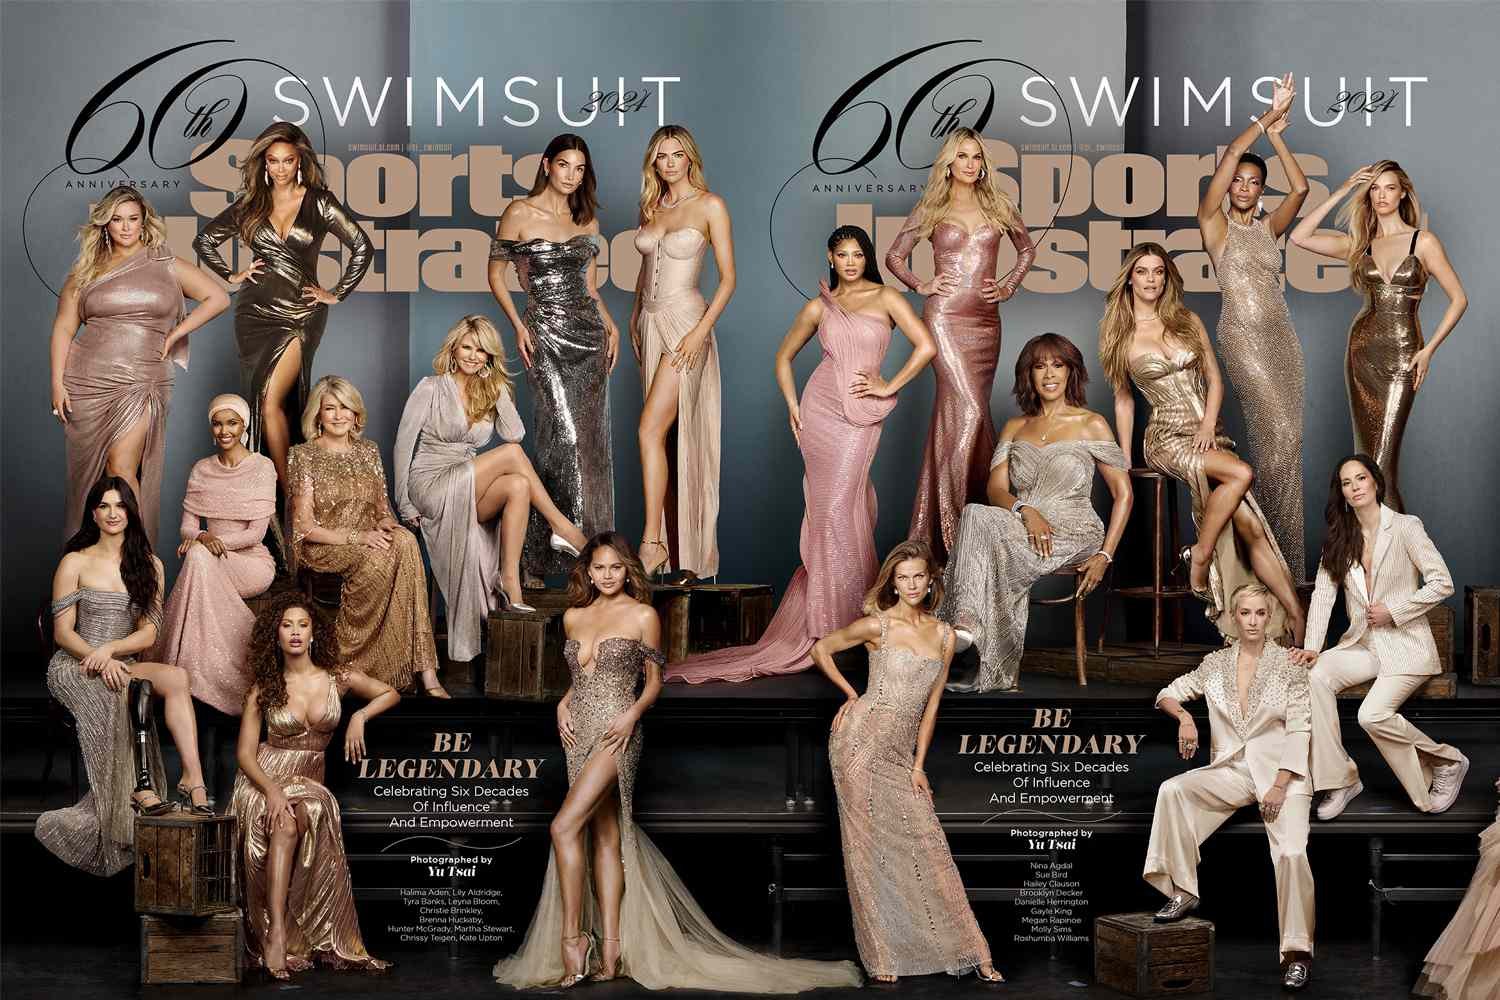 SI Swimsuit celebrates 60th anniversary with Martha Stewart, Tyra Banks and more